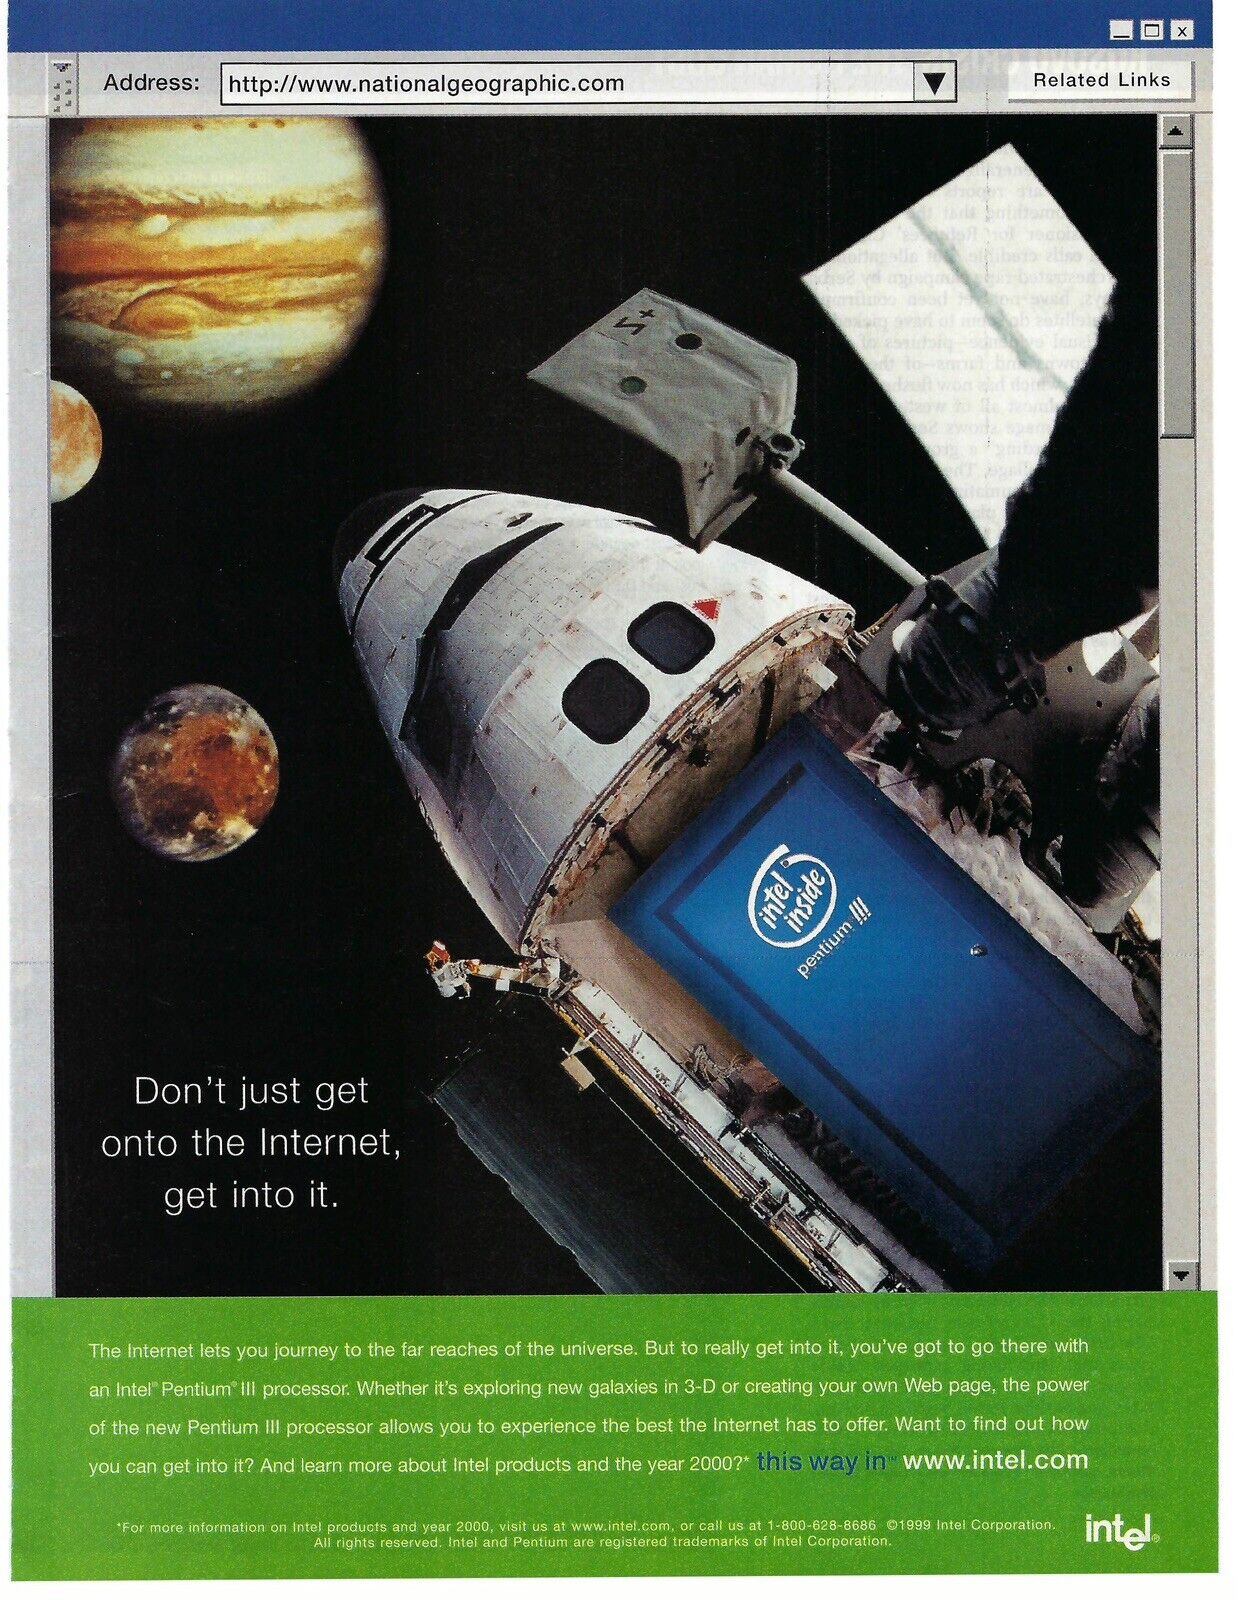 1999 Intel National Geographic Space Exploration Vintage Mag Print Ad/Poster